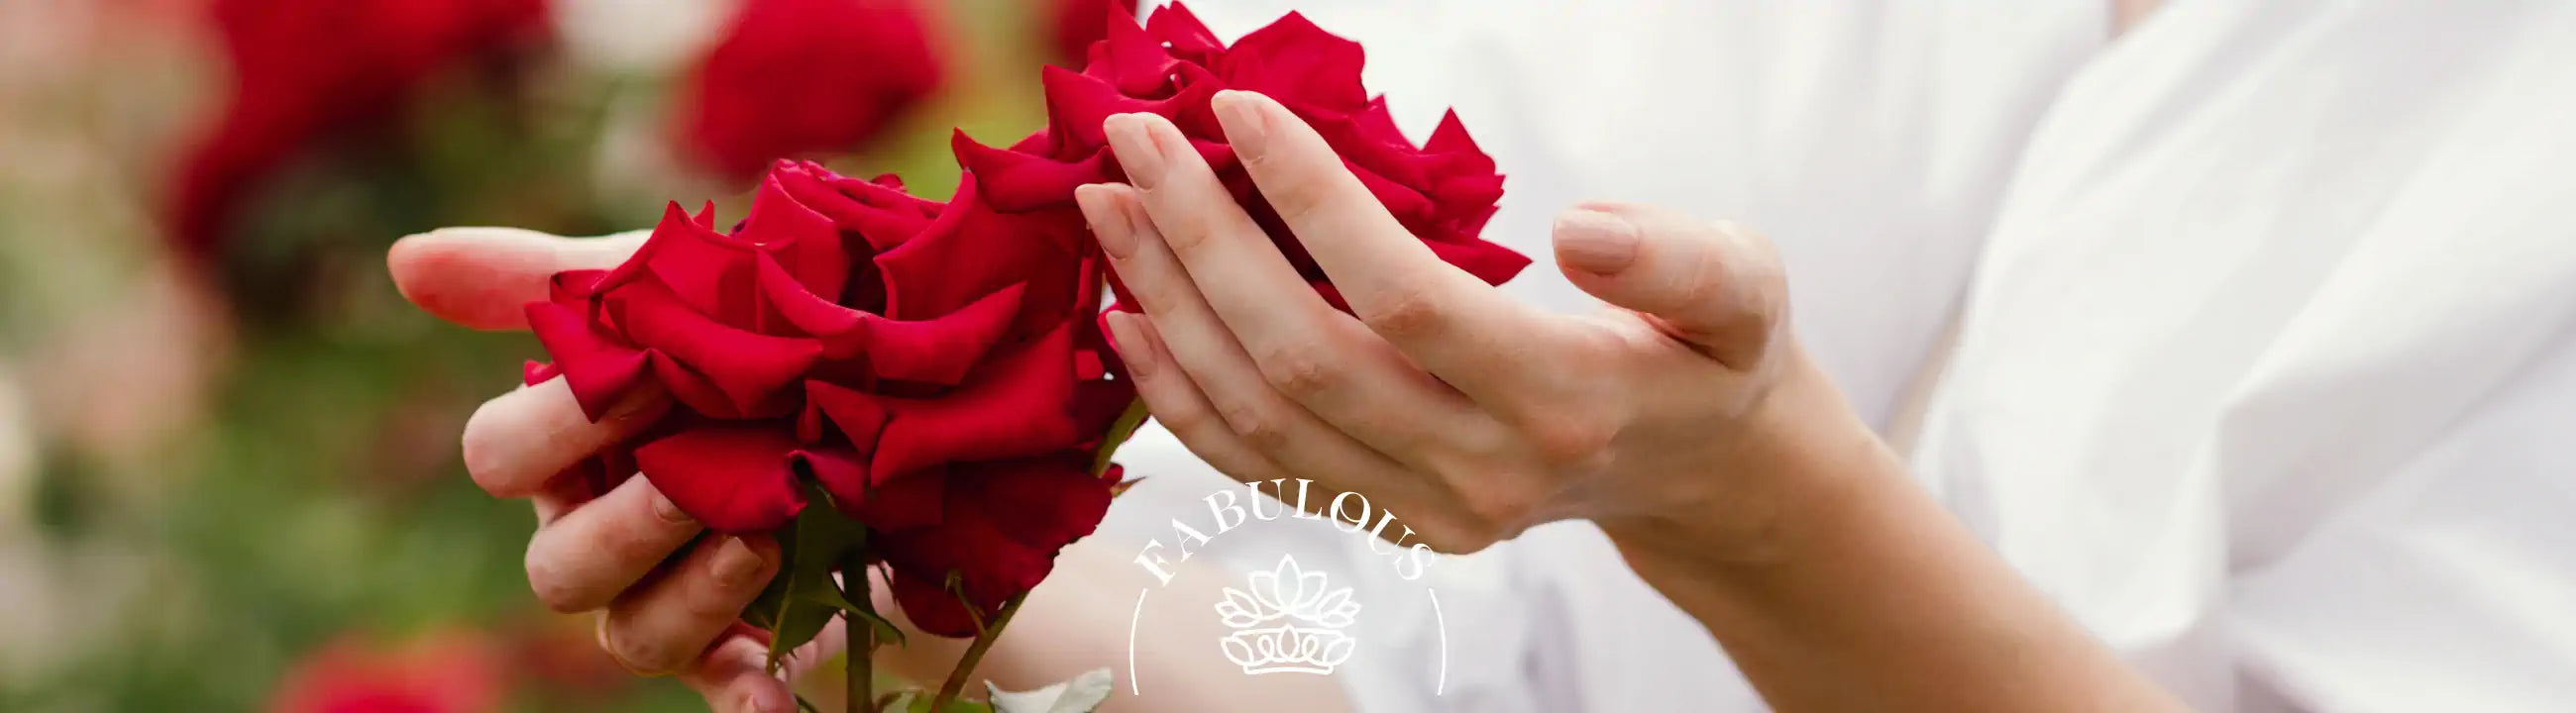 Hands gently holding vibrant red roses in a garden - Fabulous Flowers & Gifts.